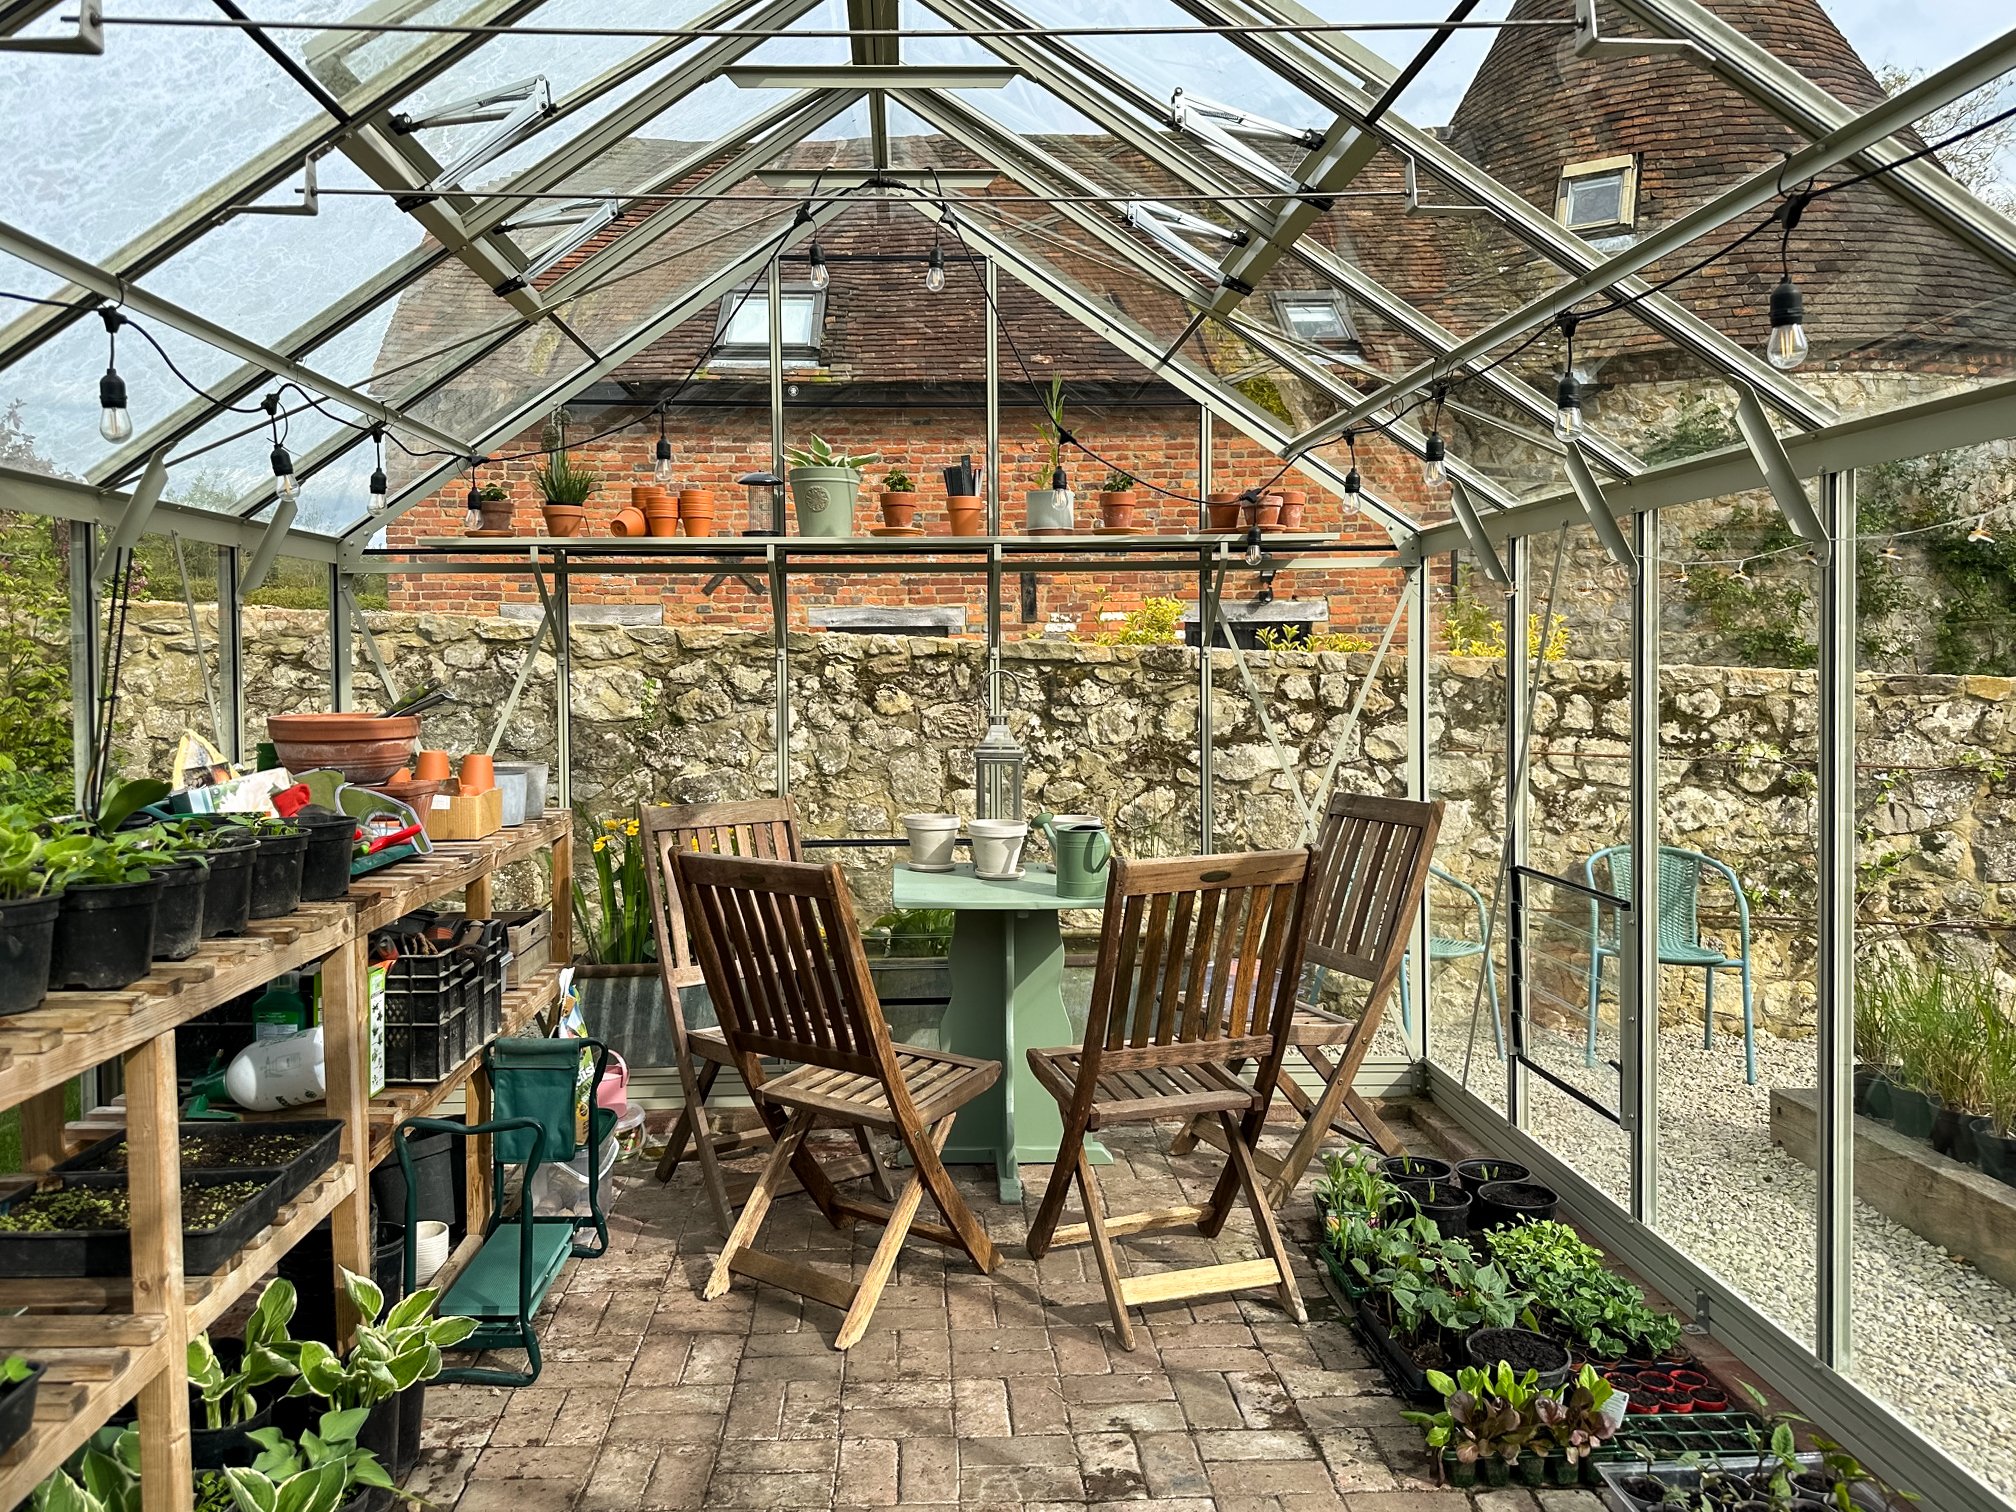 As the weather is just about turning and show us spring as we know it, the garden has been waking up and the birds are singing. Let&rsquo;s face it - it is the most joyful time of the year for most of us!⁠

Here we have our treasured greenhouse, a sm